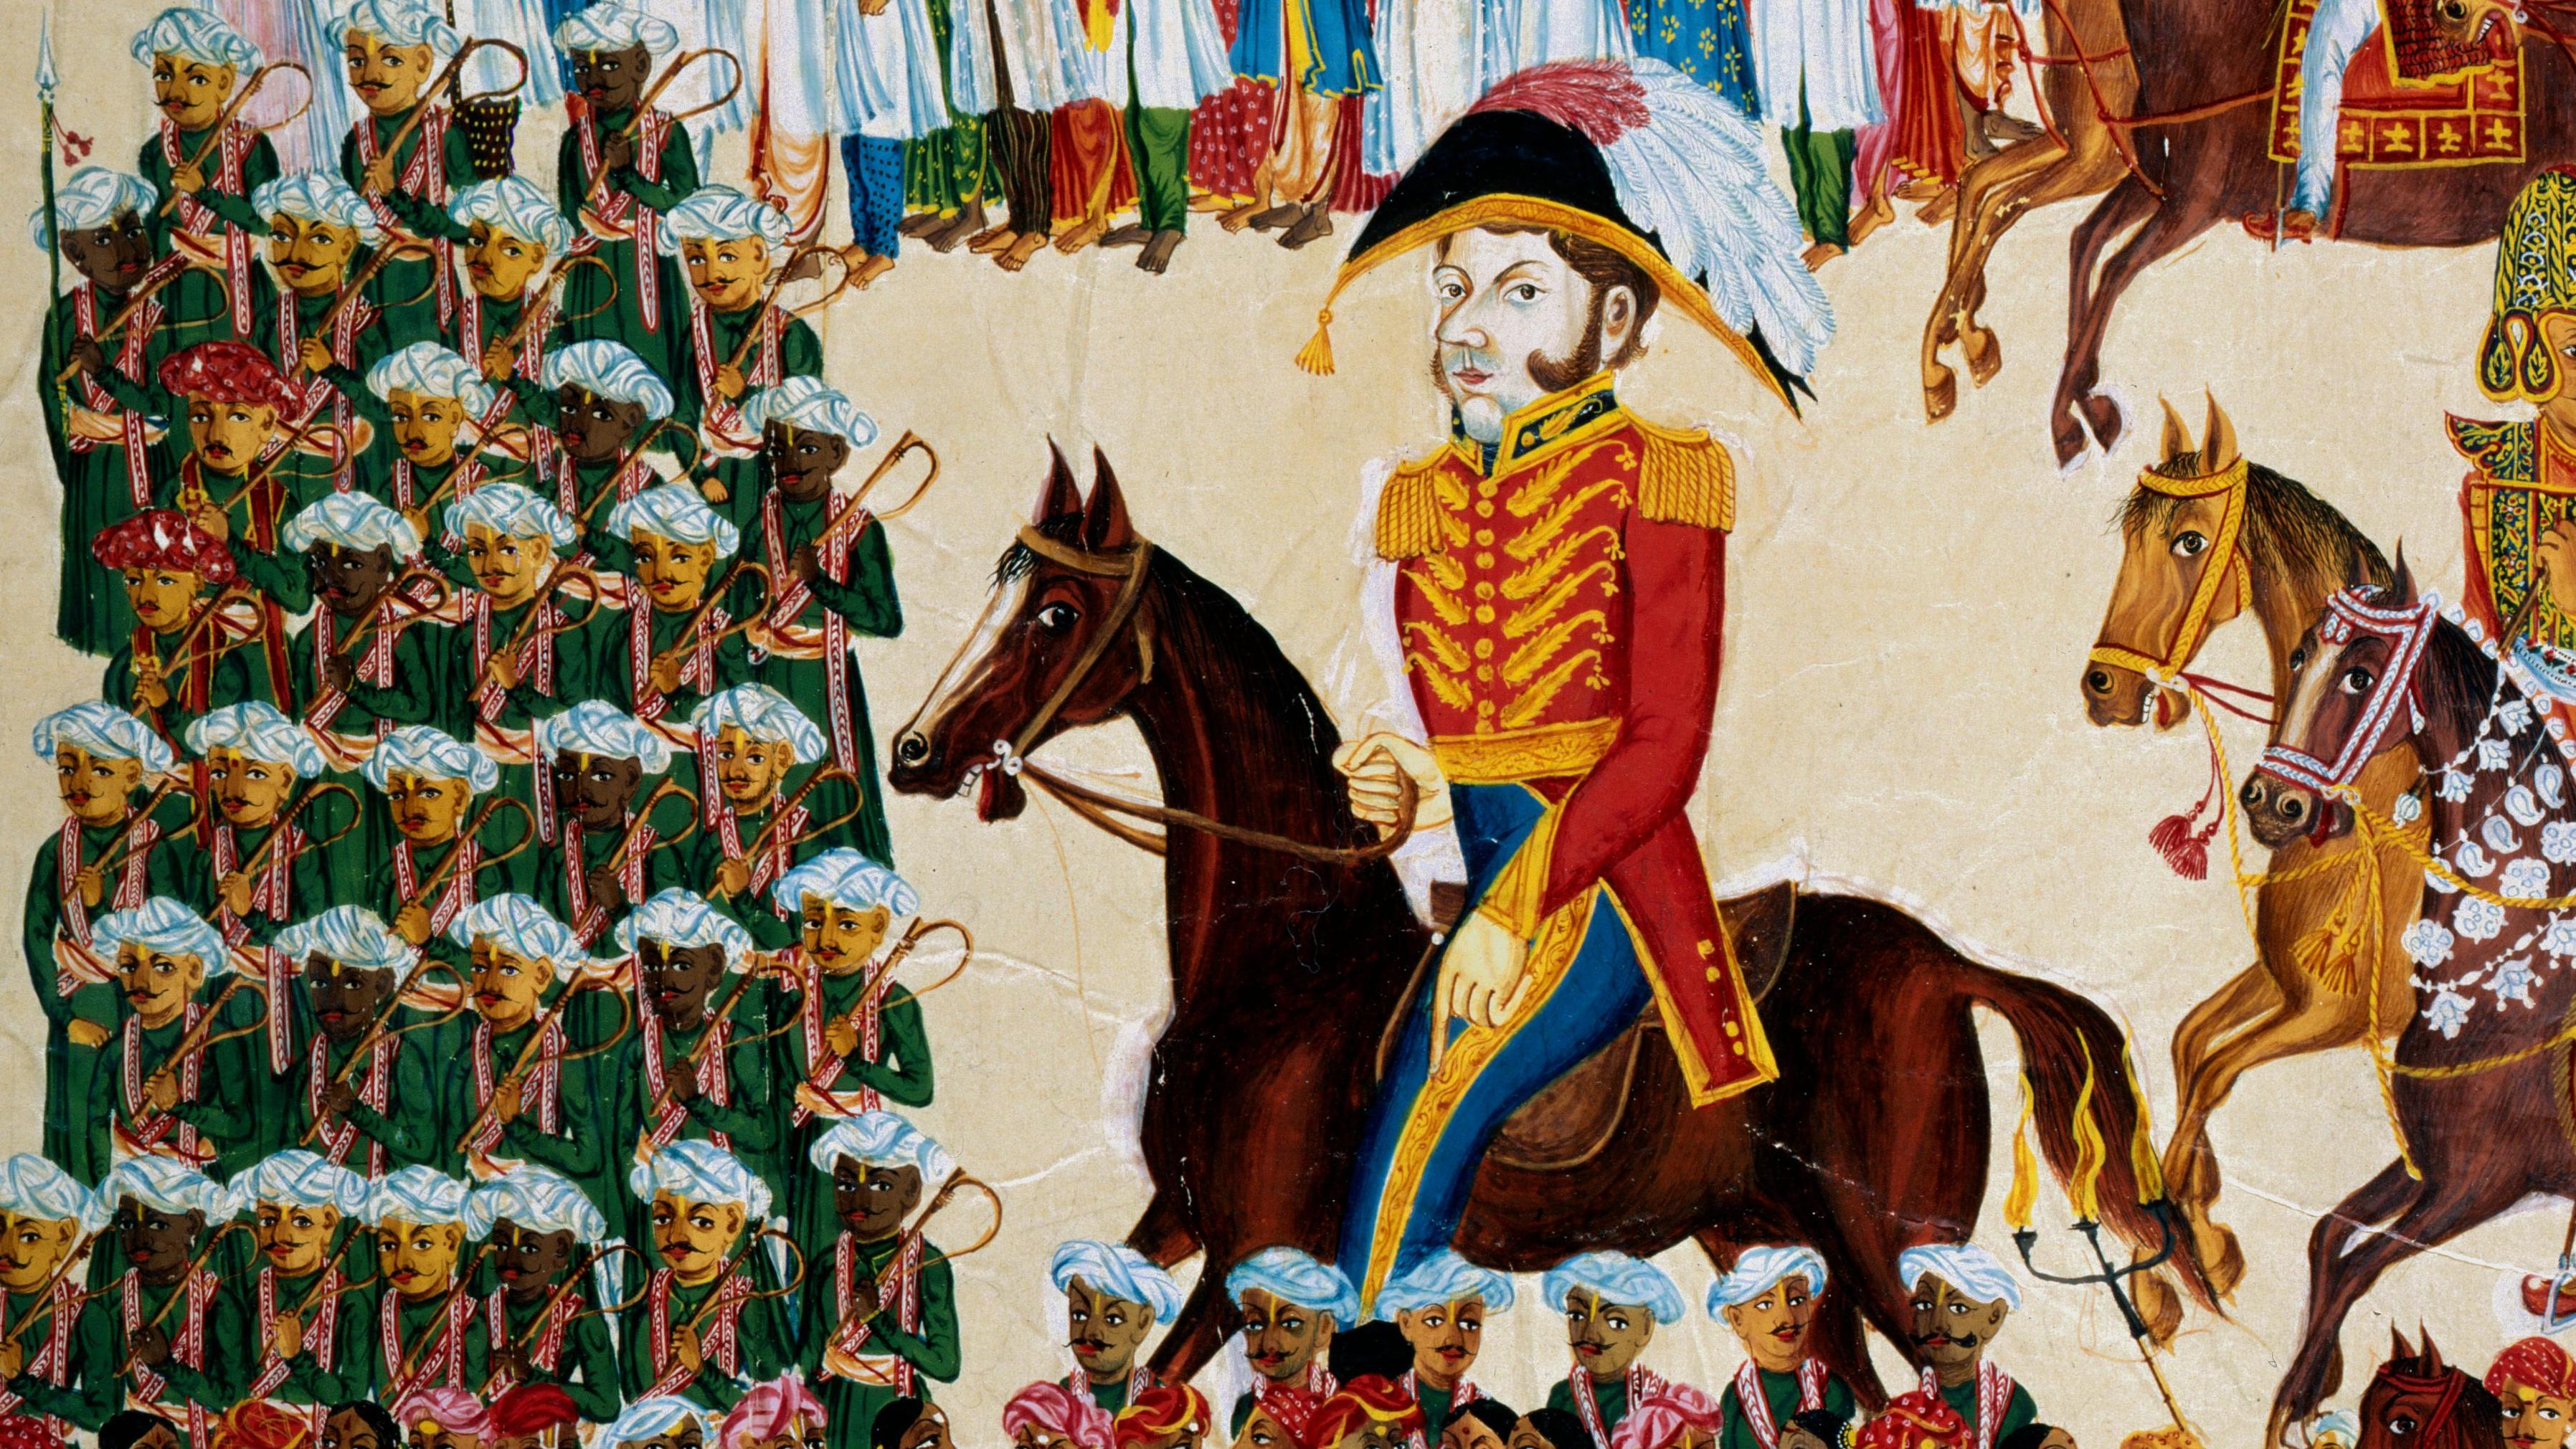 Pomp: an East India Company procession in India, 1825-30